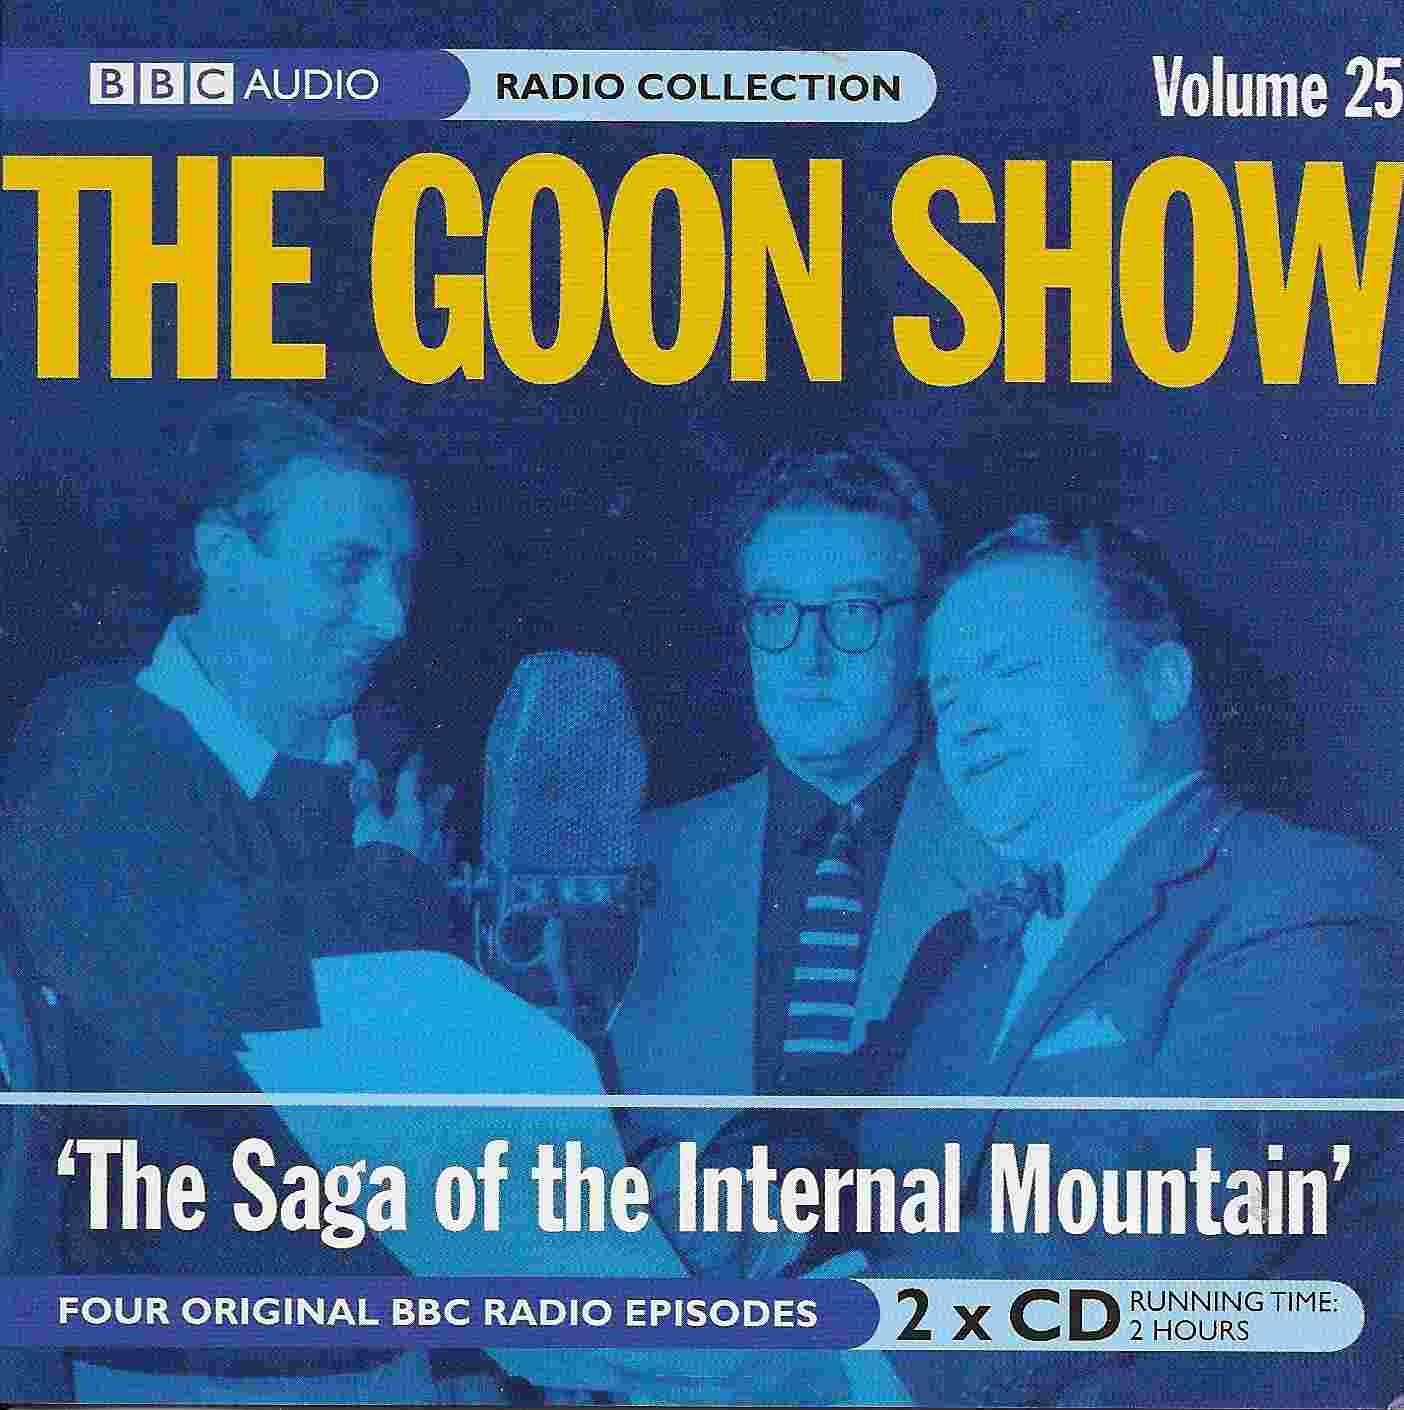 Picture of The Goon show 25 - The saga of the internal mountain by artist Spike Milligan / Eric Sykes from the BBC cds - Records and Tapes library